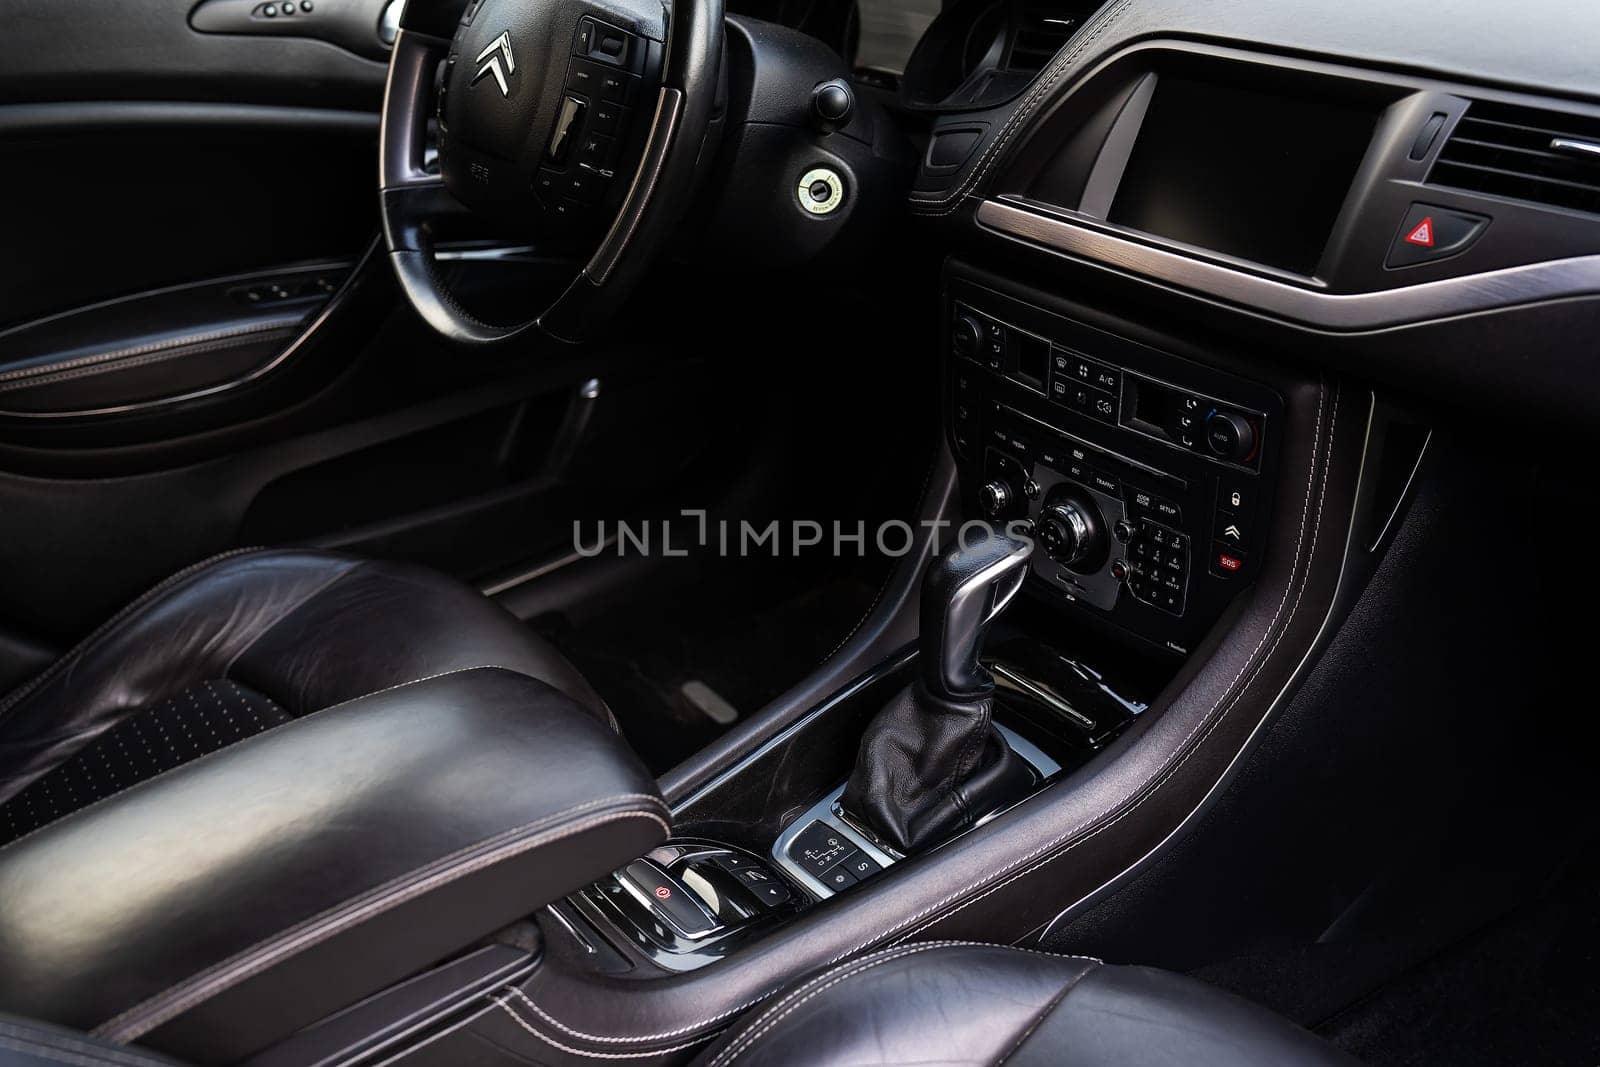 Modern car interior with a multimedia screen and many buttons. Citroen car, gearbox and steering wheel in the frame